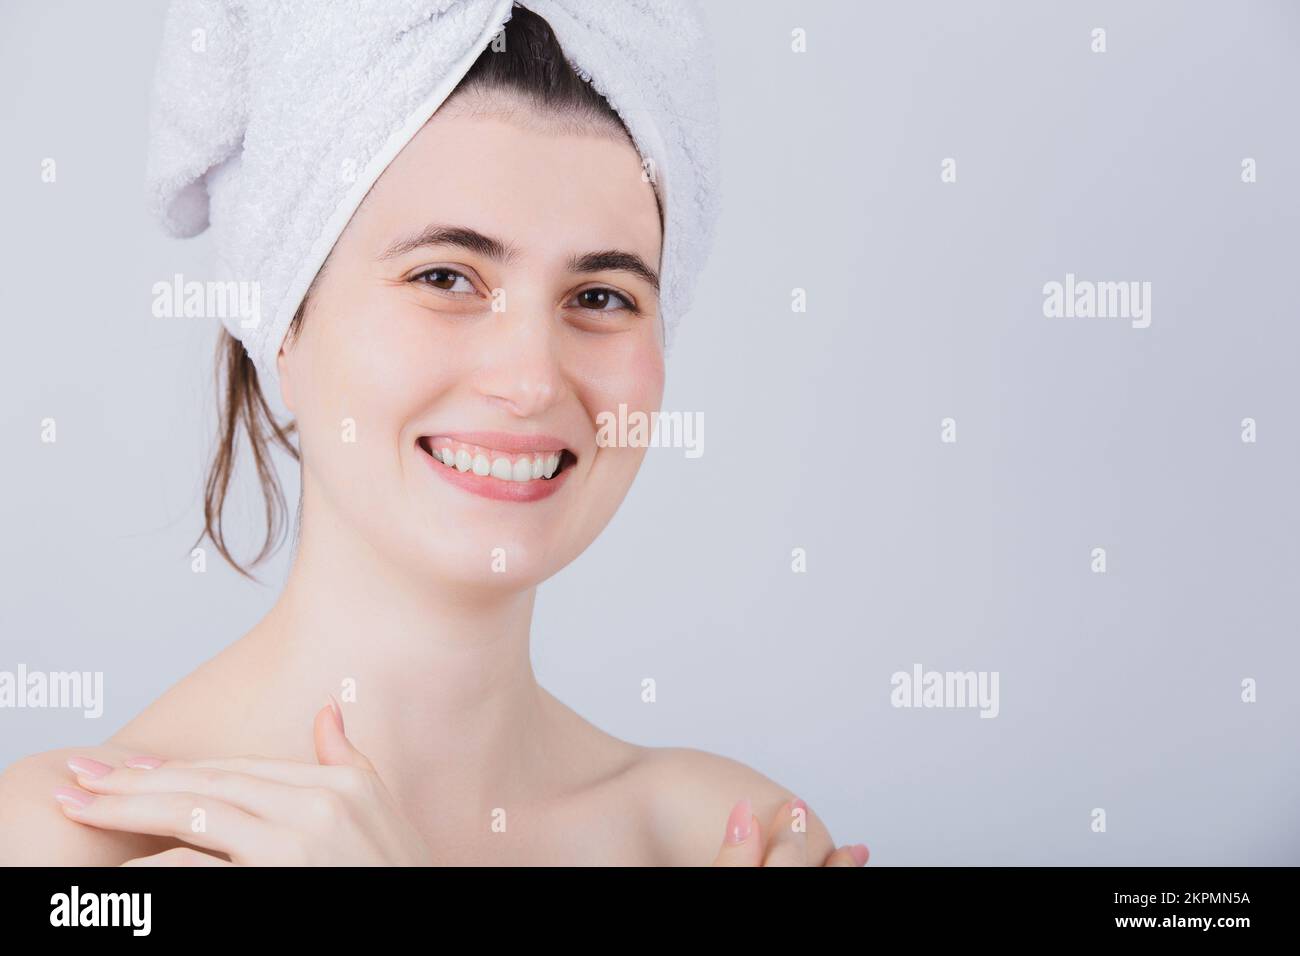 Young Woman With Towel On Head Smiling to Camera. Body Care Concept. Young girl drying hair with towel on head after shower treatment. Stock Photo